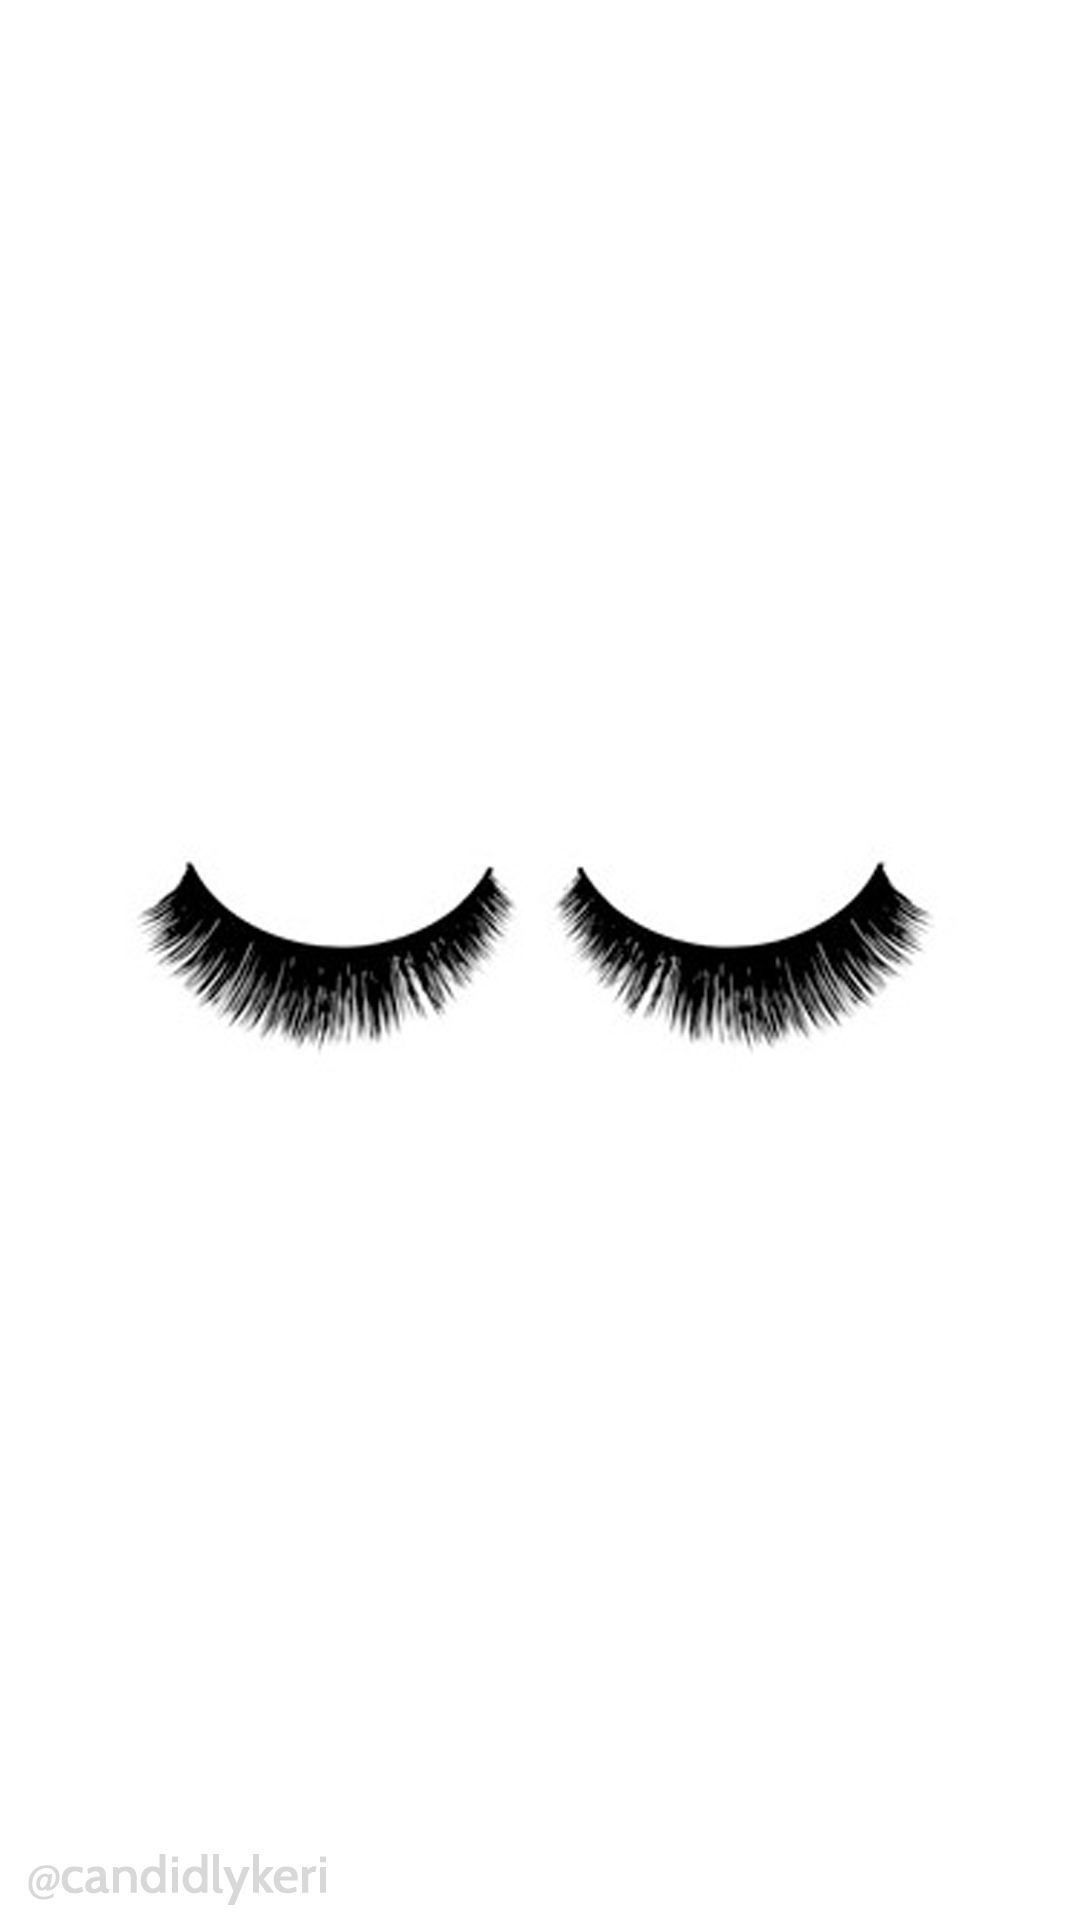 1080x1920 Eyelashes Fake lashes sleepy background wallpaper you can download for free  on the blog! For any device; mobile, desktop, iphone, android!